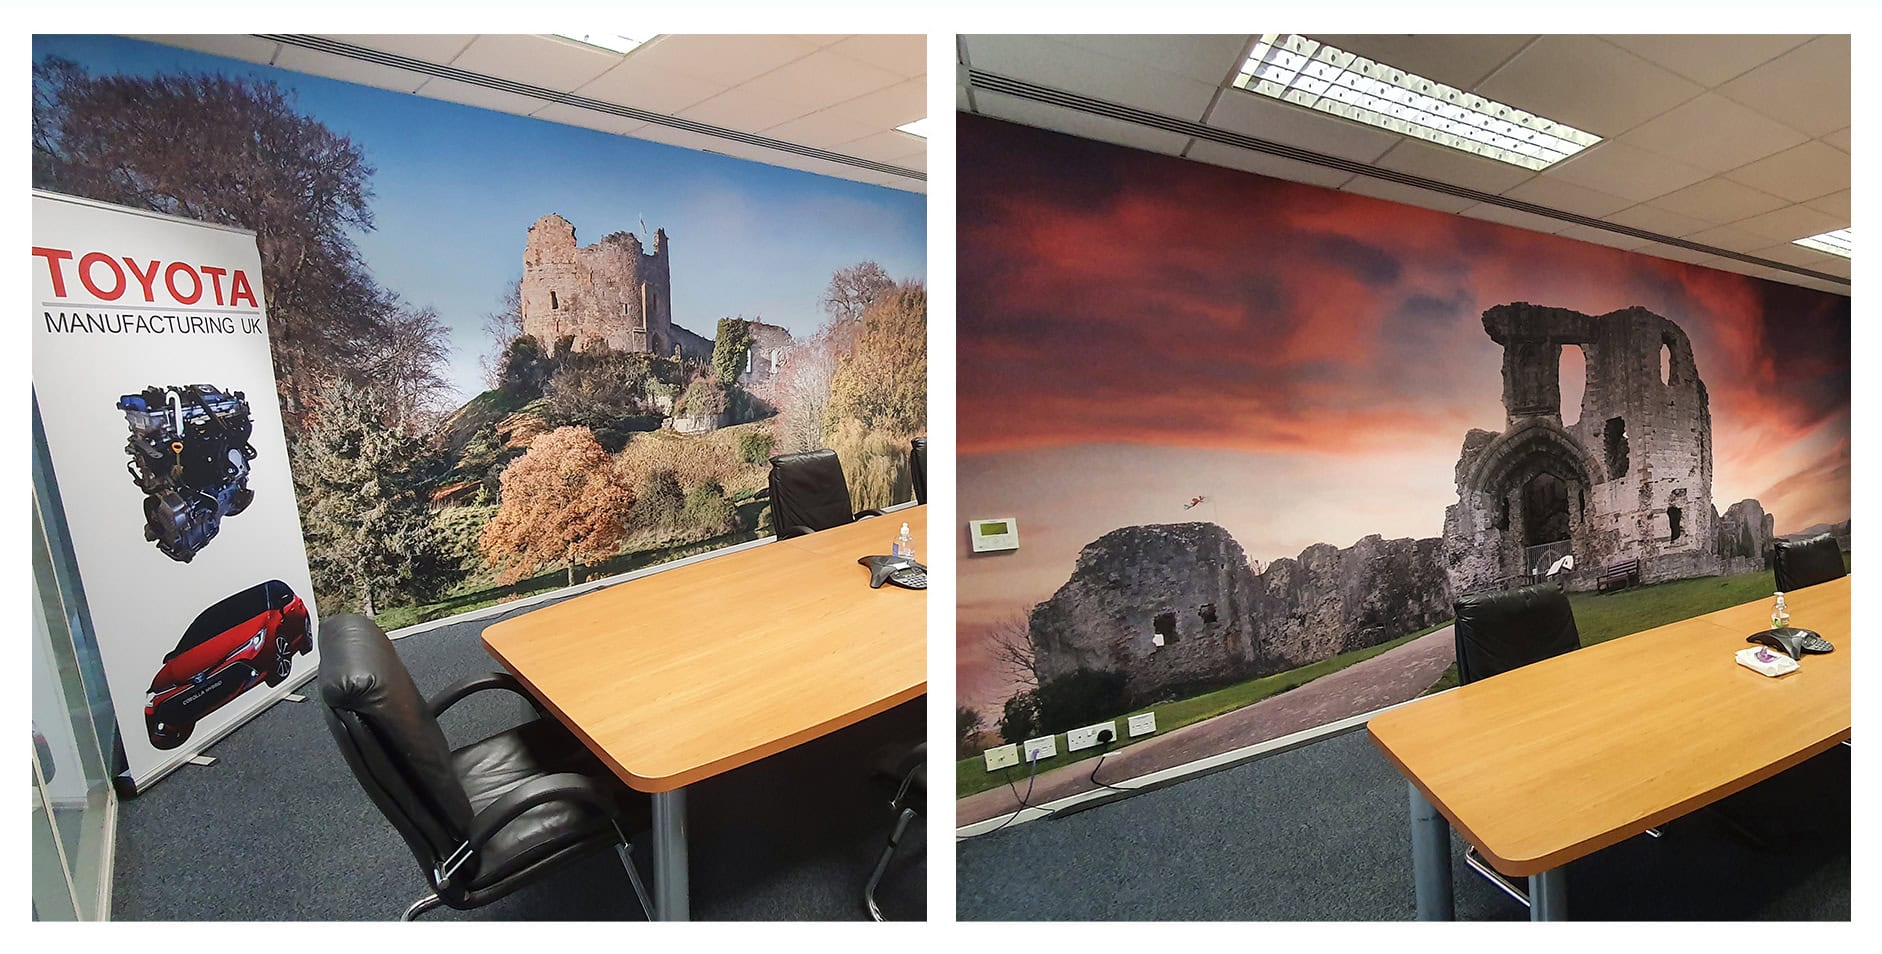 Welsh castle images on Toyota meeting room walls